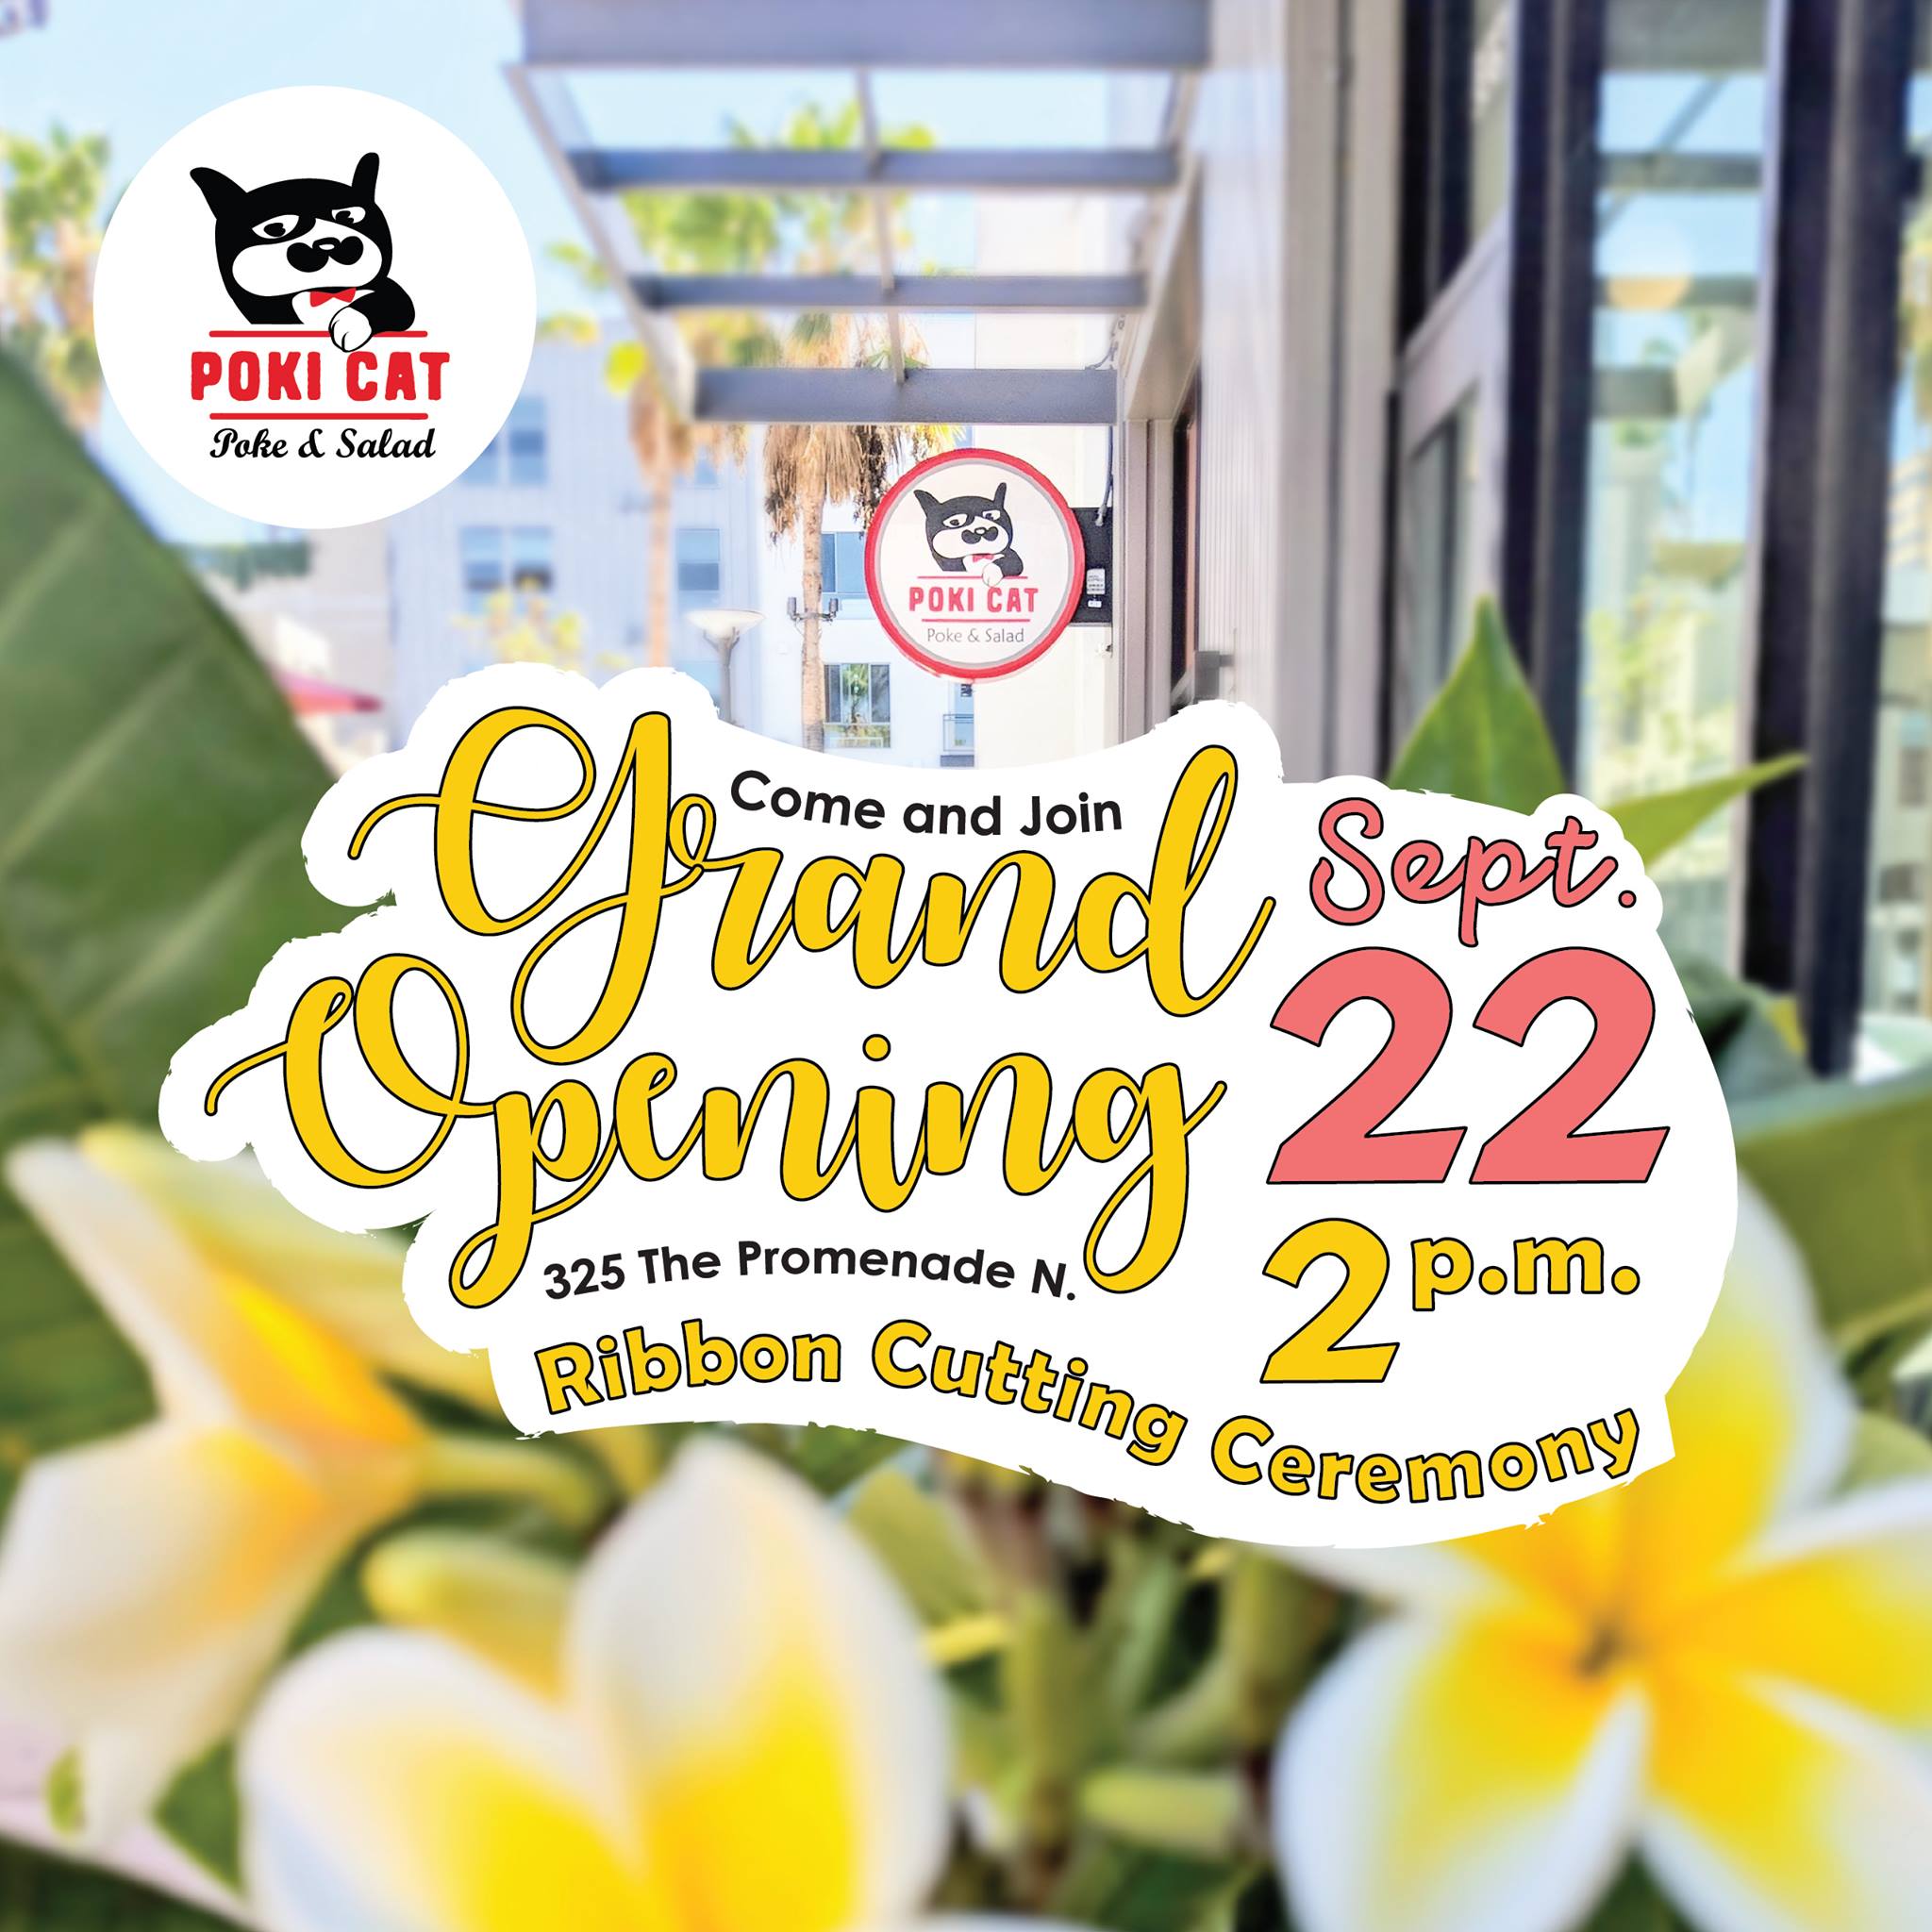 Poki Cat To Officially Open At The Streets